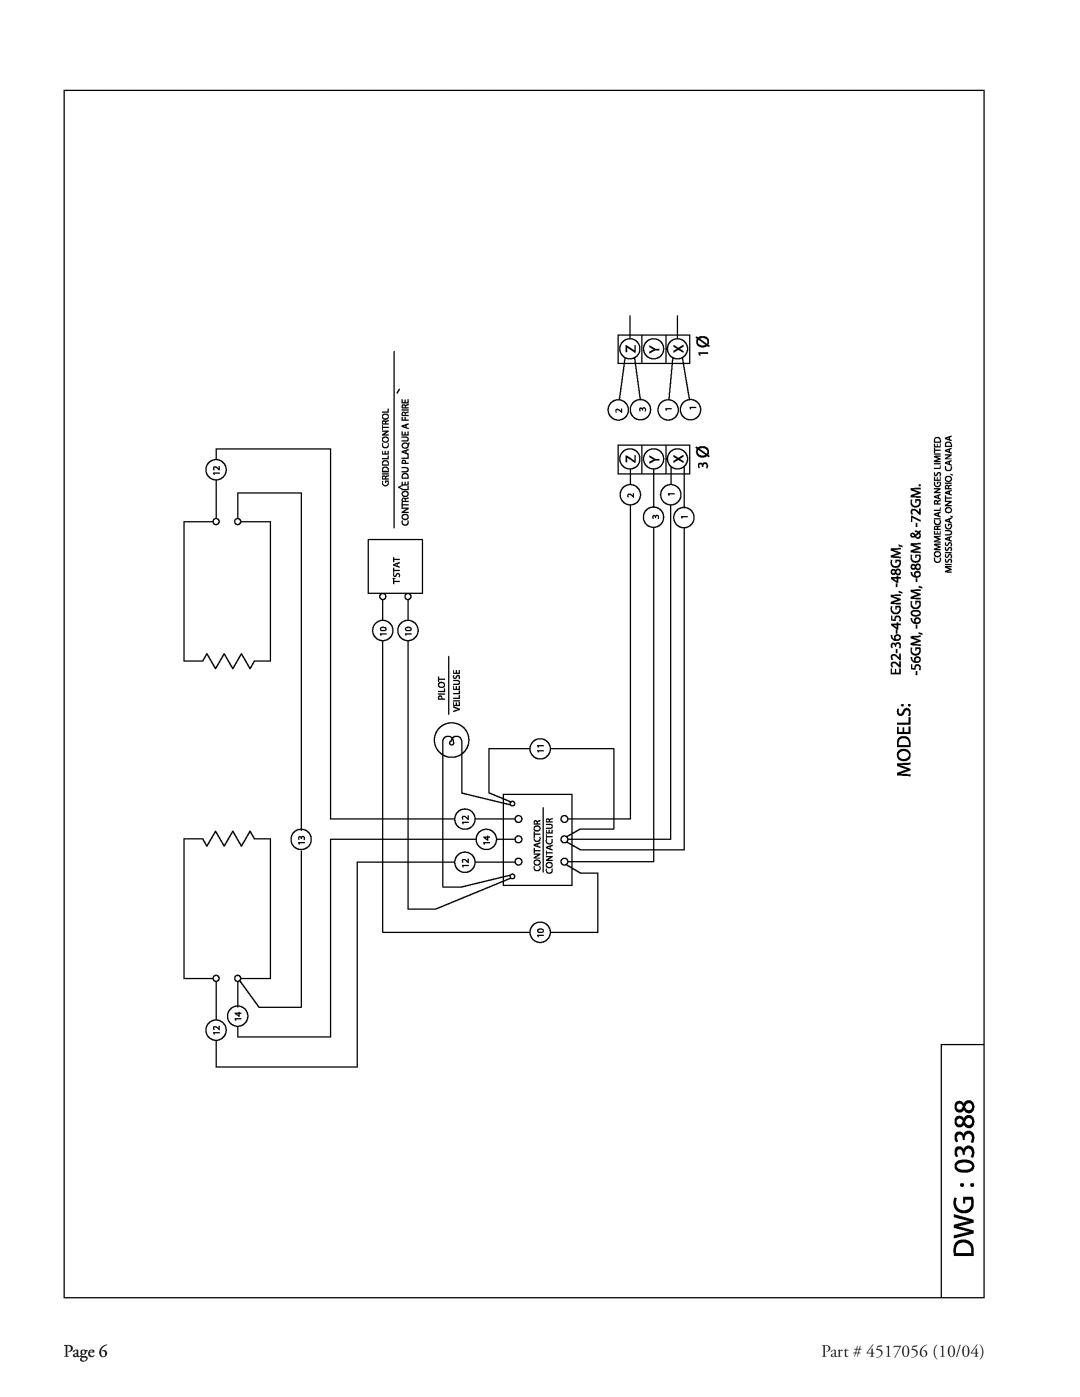 Garland E22-36 installation instructions Page, 4517056 10/04 